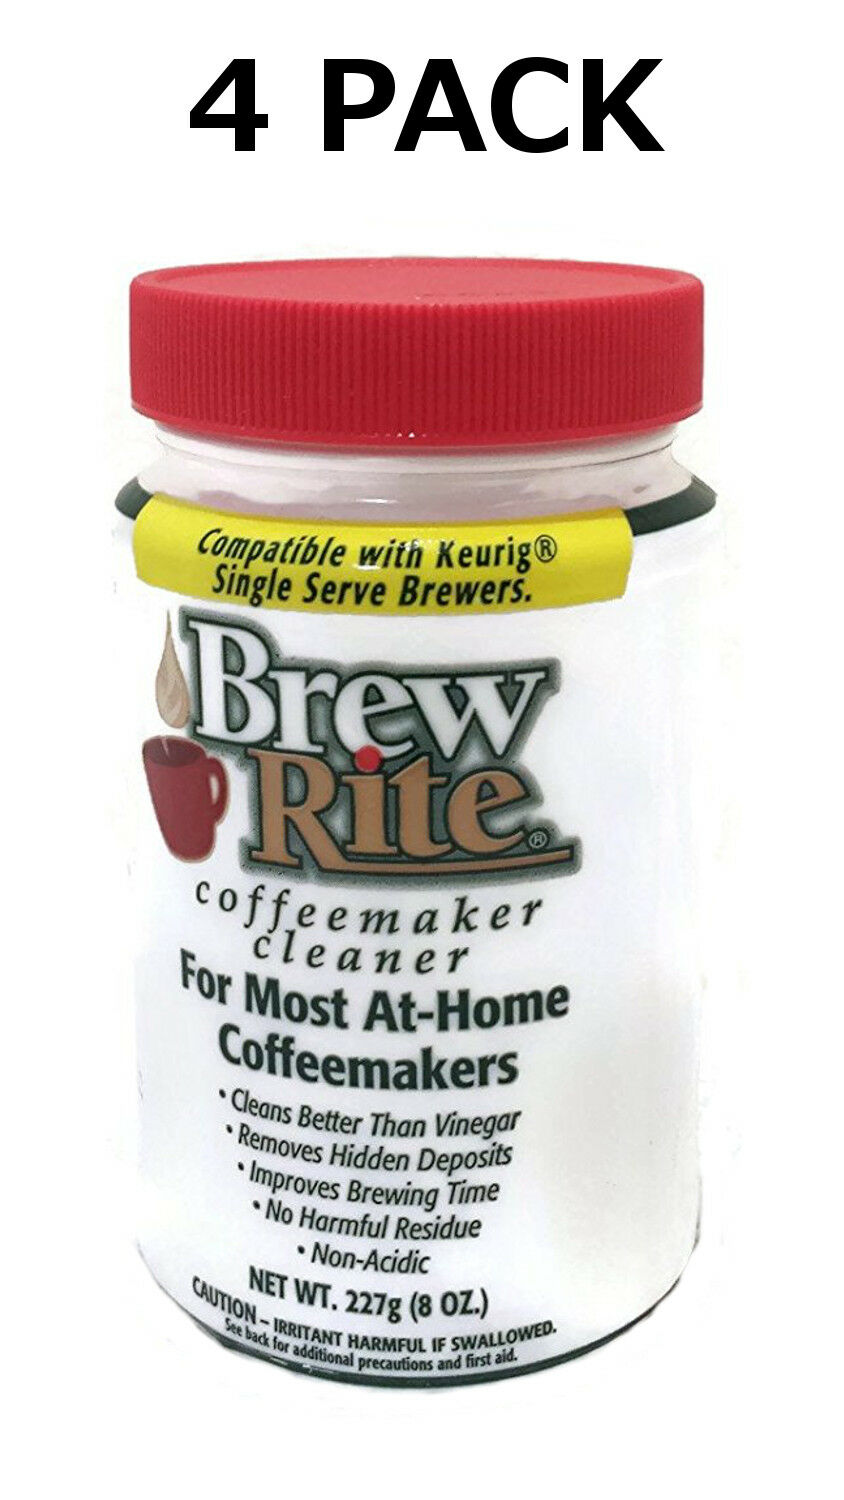 (4) Brew Rite Coffee Maker Cleaner For Espresso Machines And Drip Coffeemakers